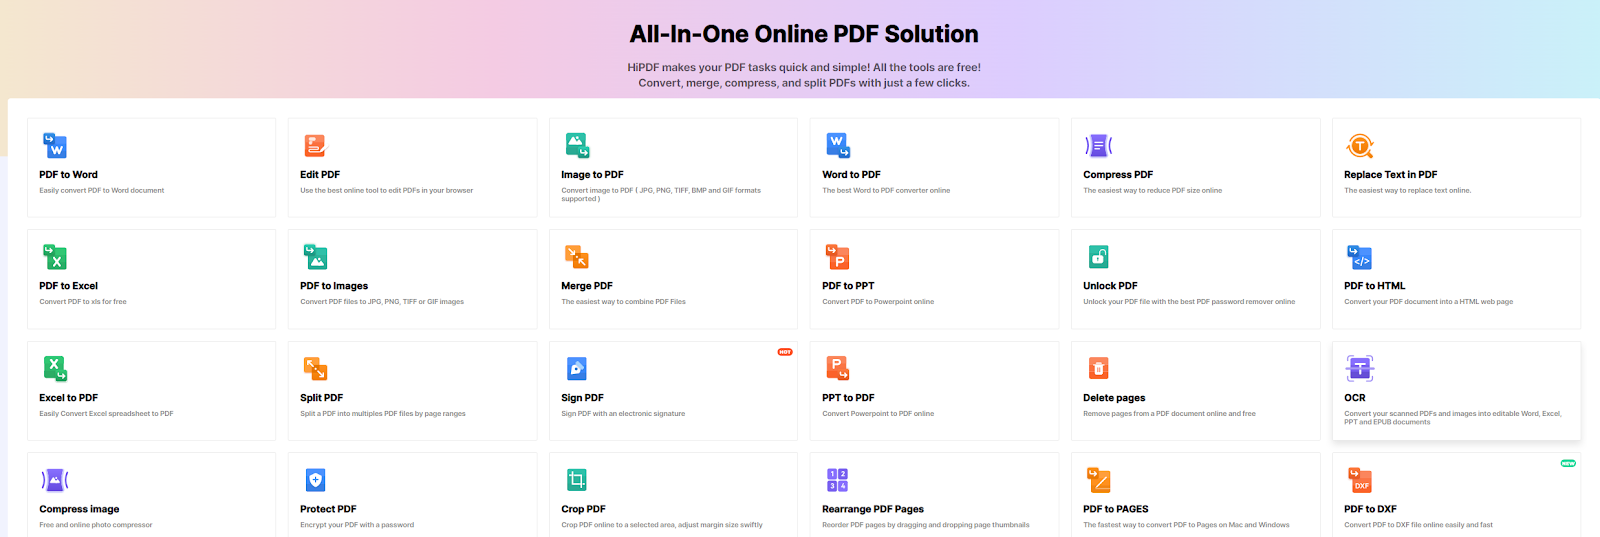 The best all-in-one free online PDF solution in 2022